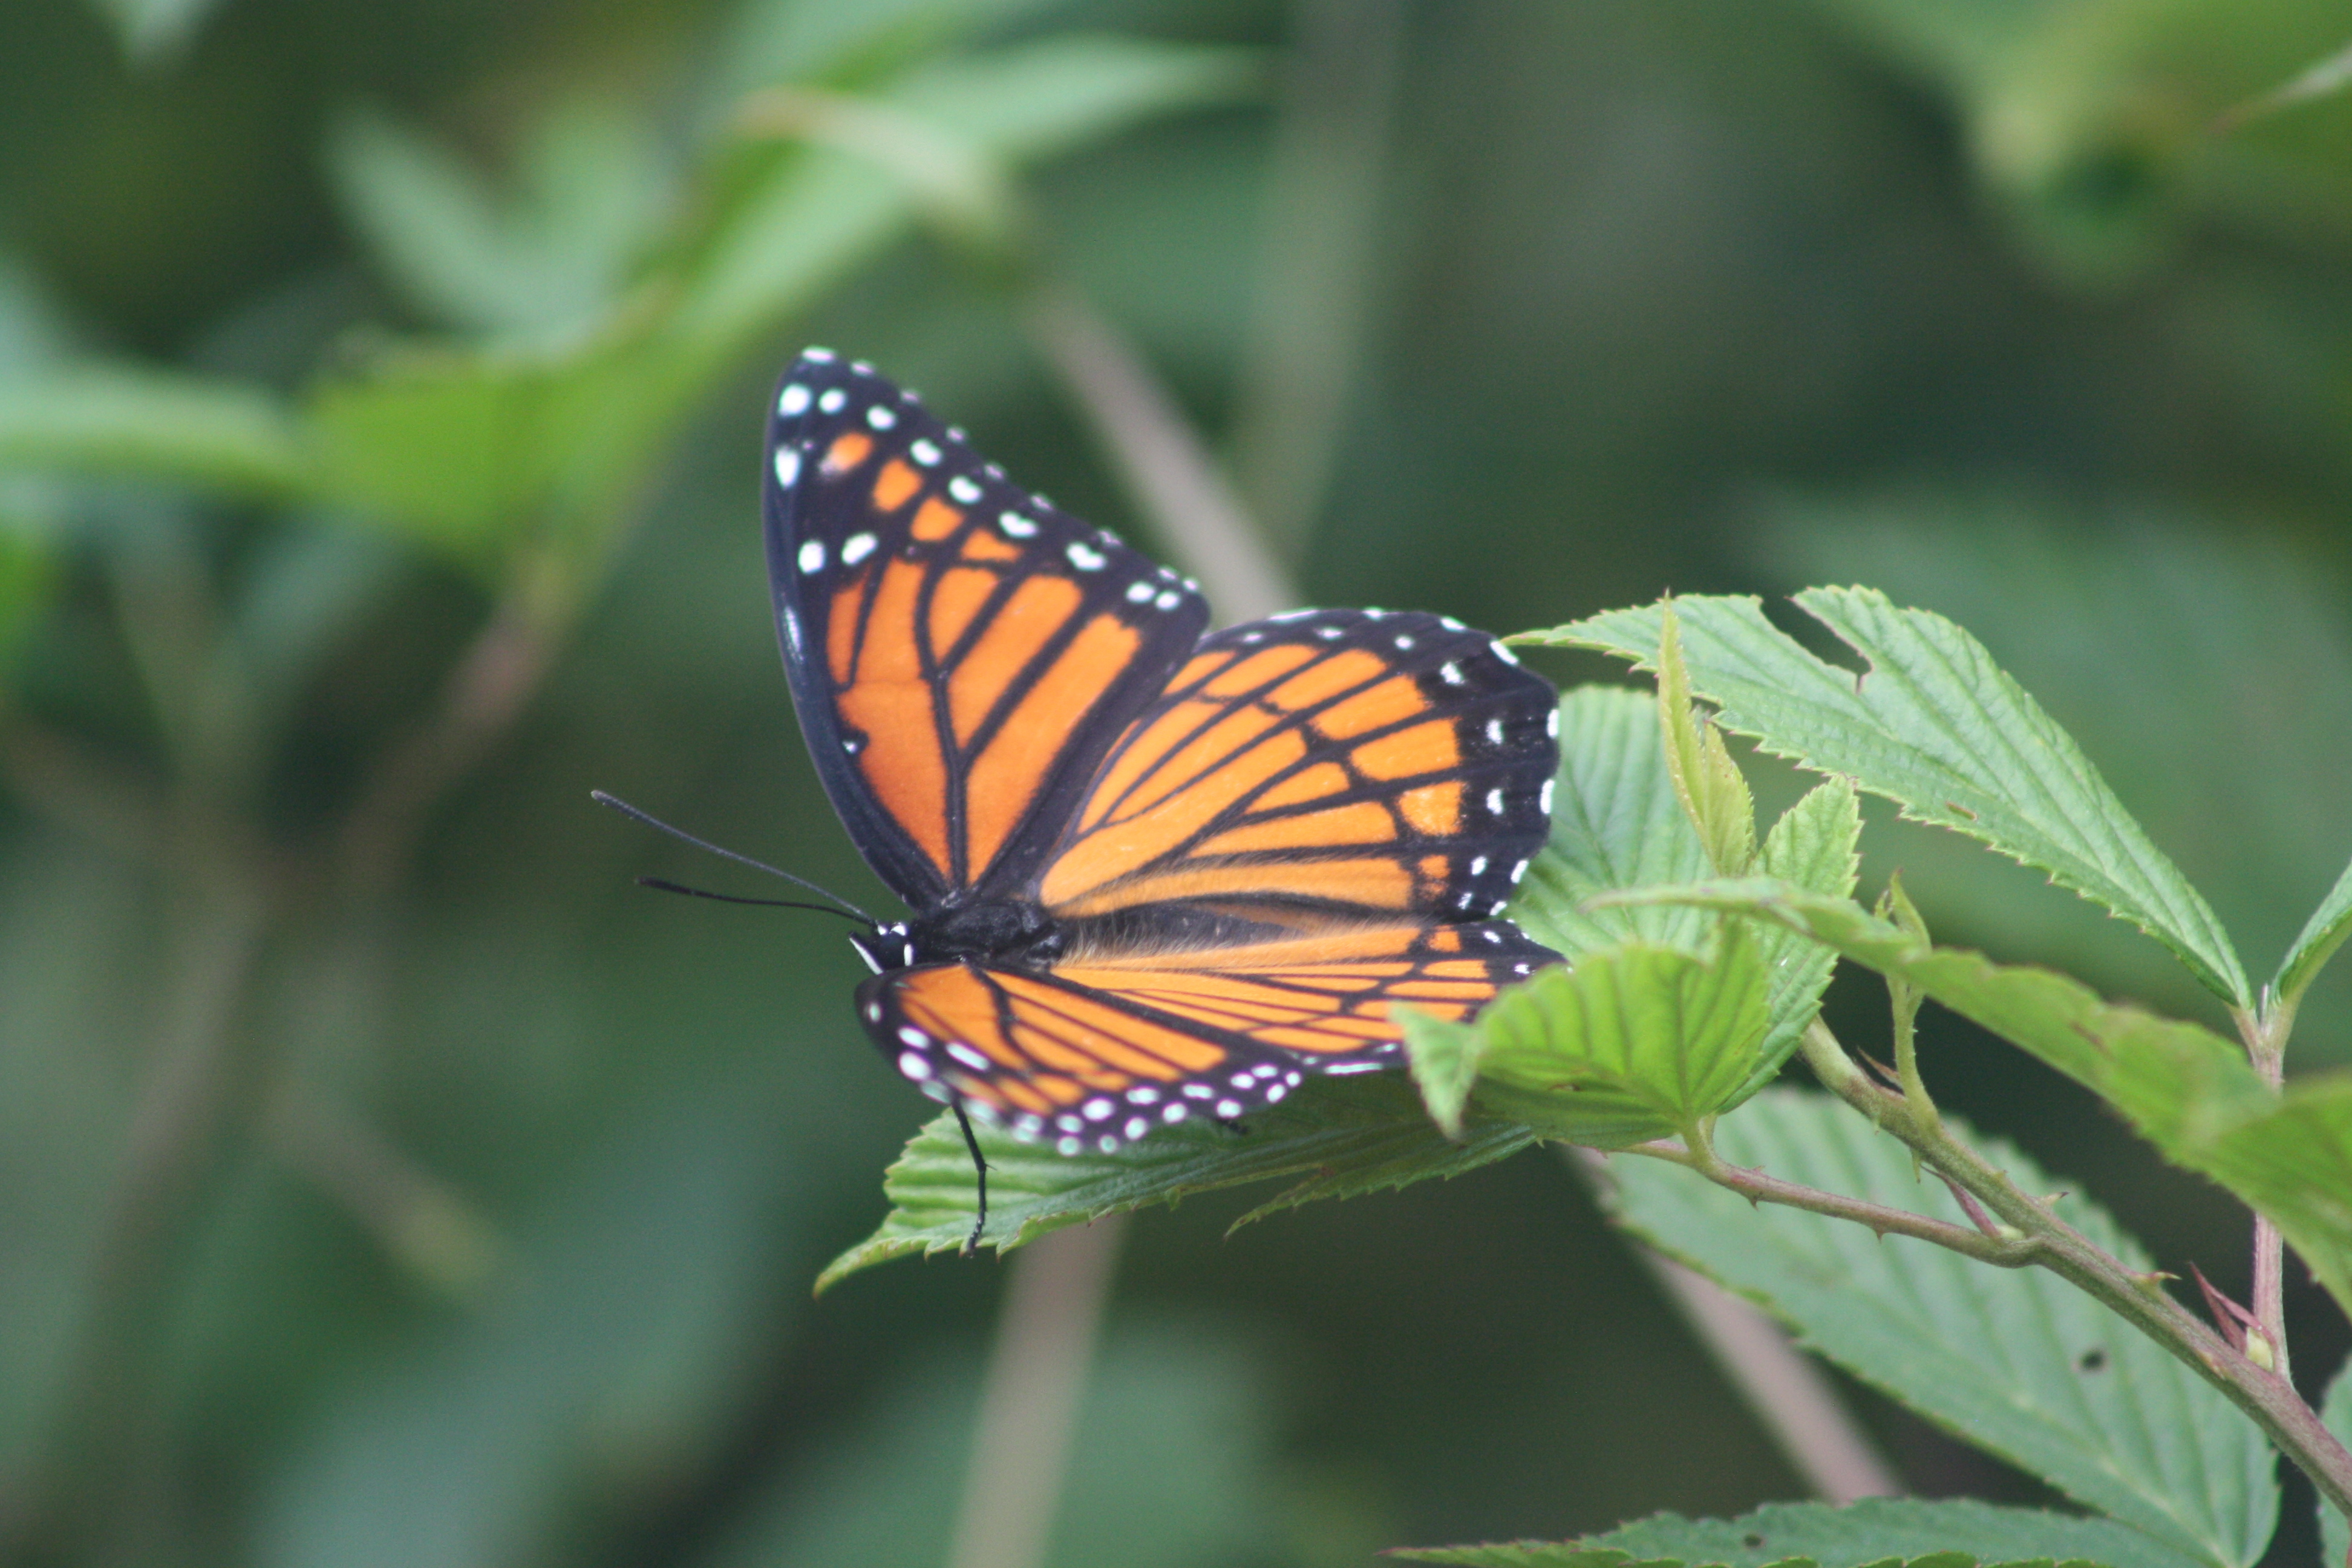 Meet the Viceroy, Kentucky's state butterfly